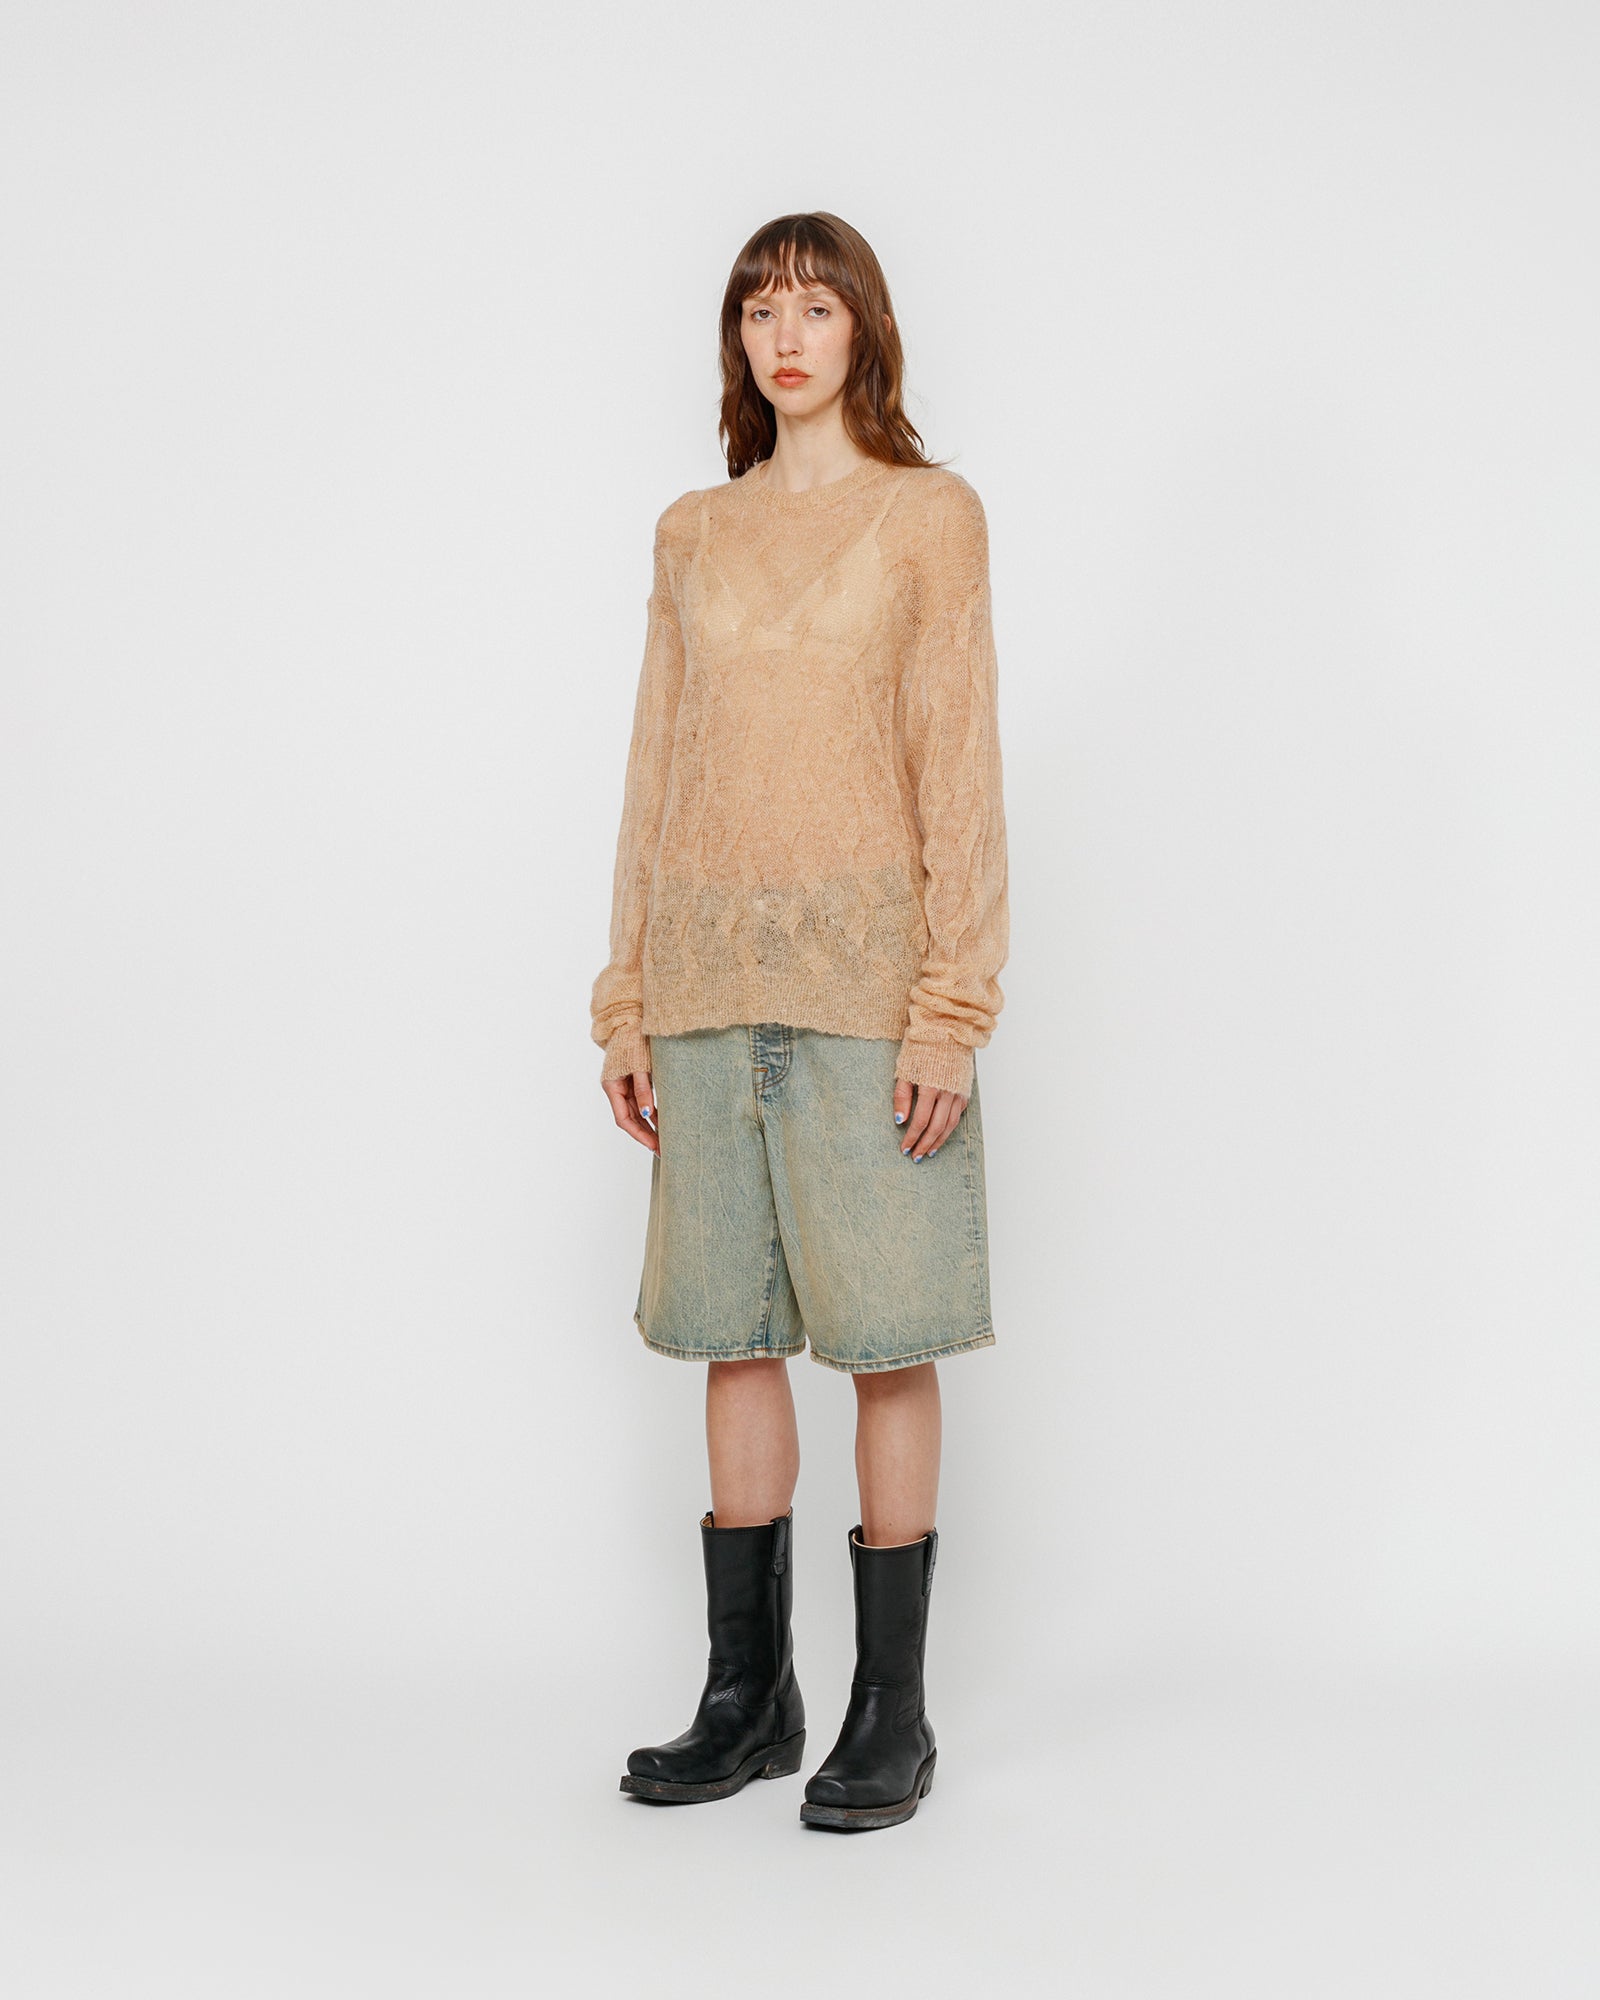 STÜSSY LOOSE KNIT CROSS CABLE SWEATER SAND SWEATER